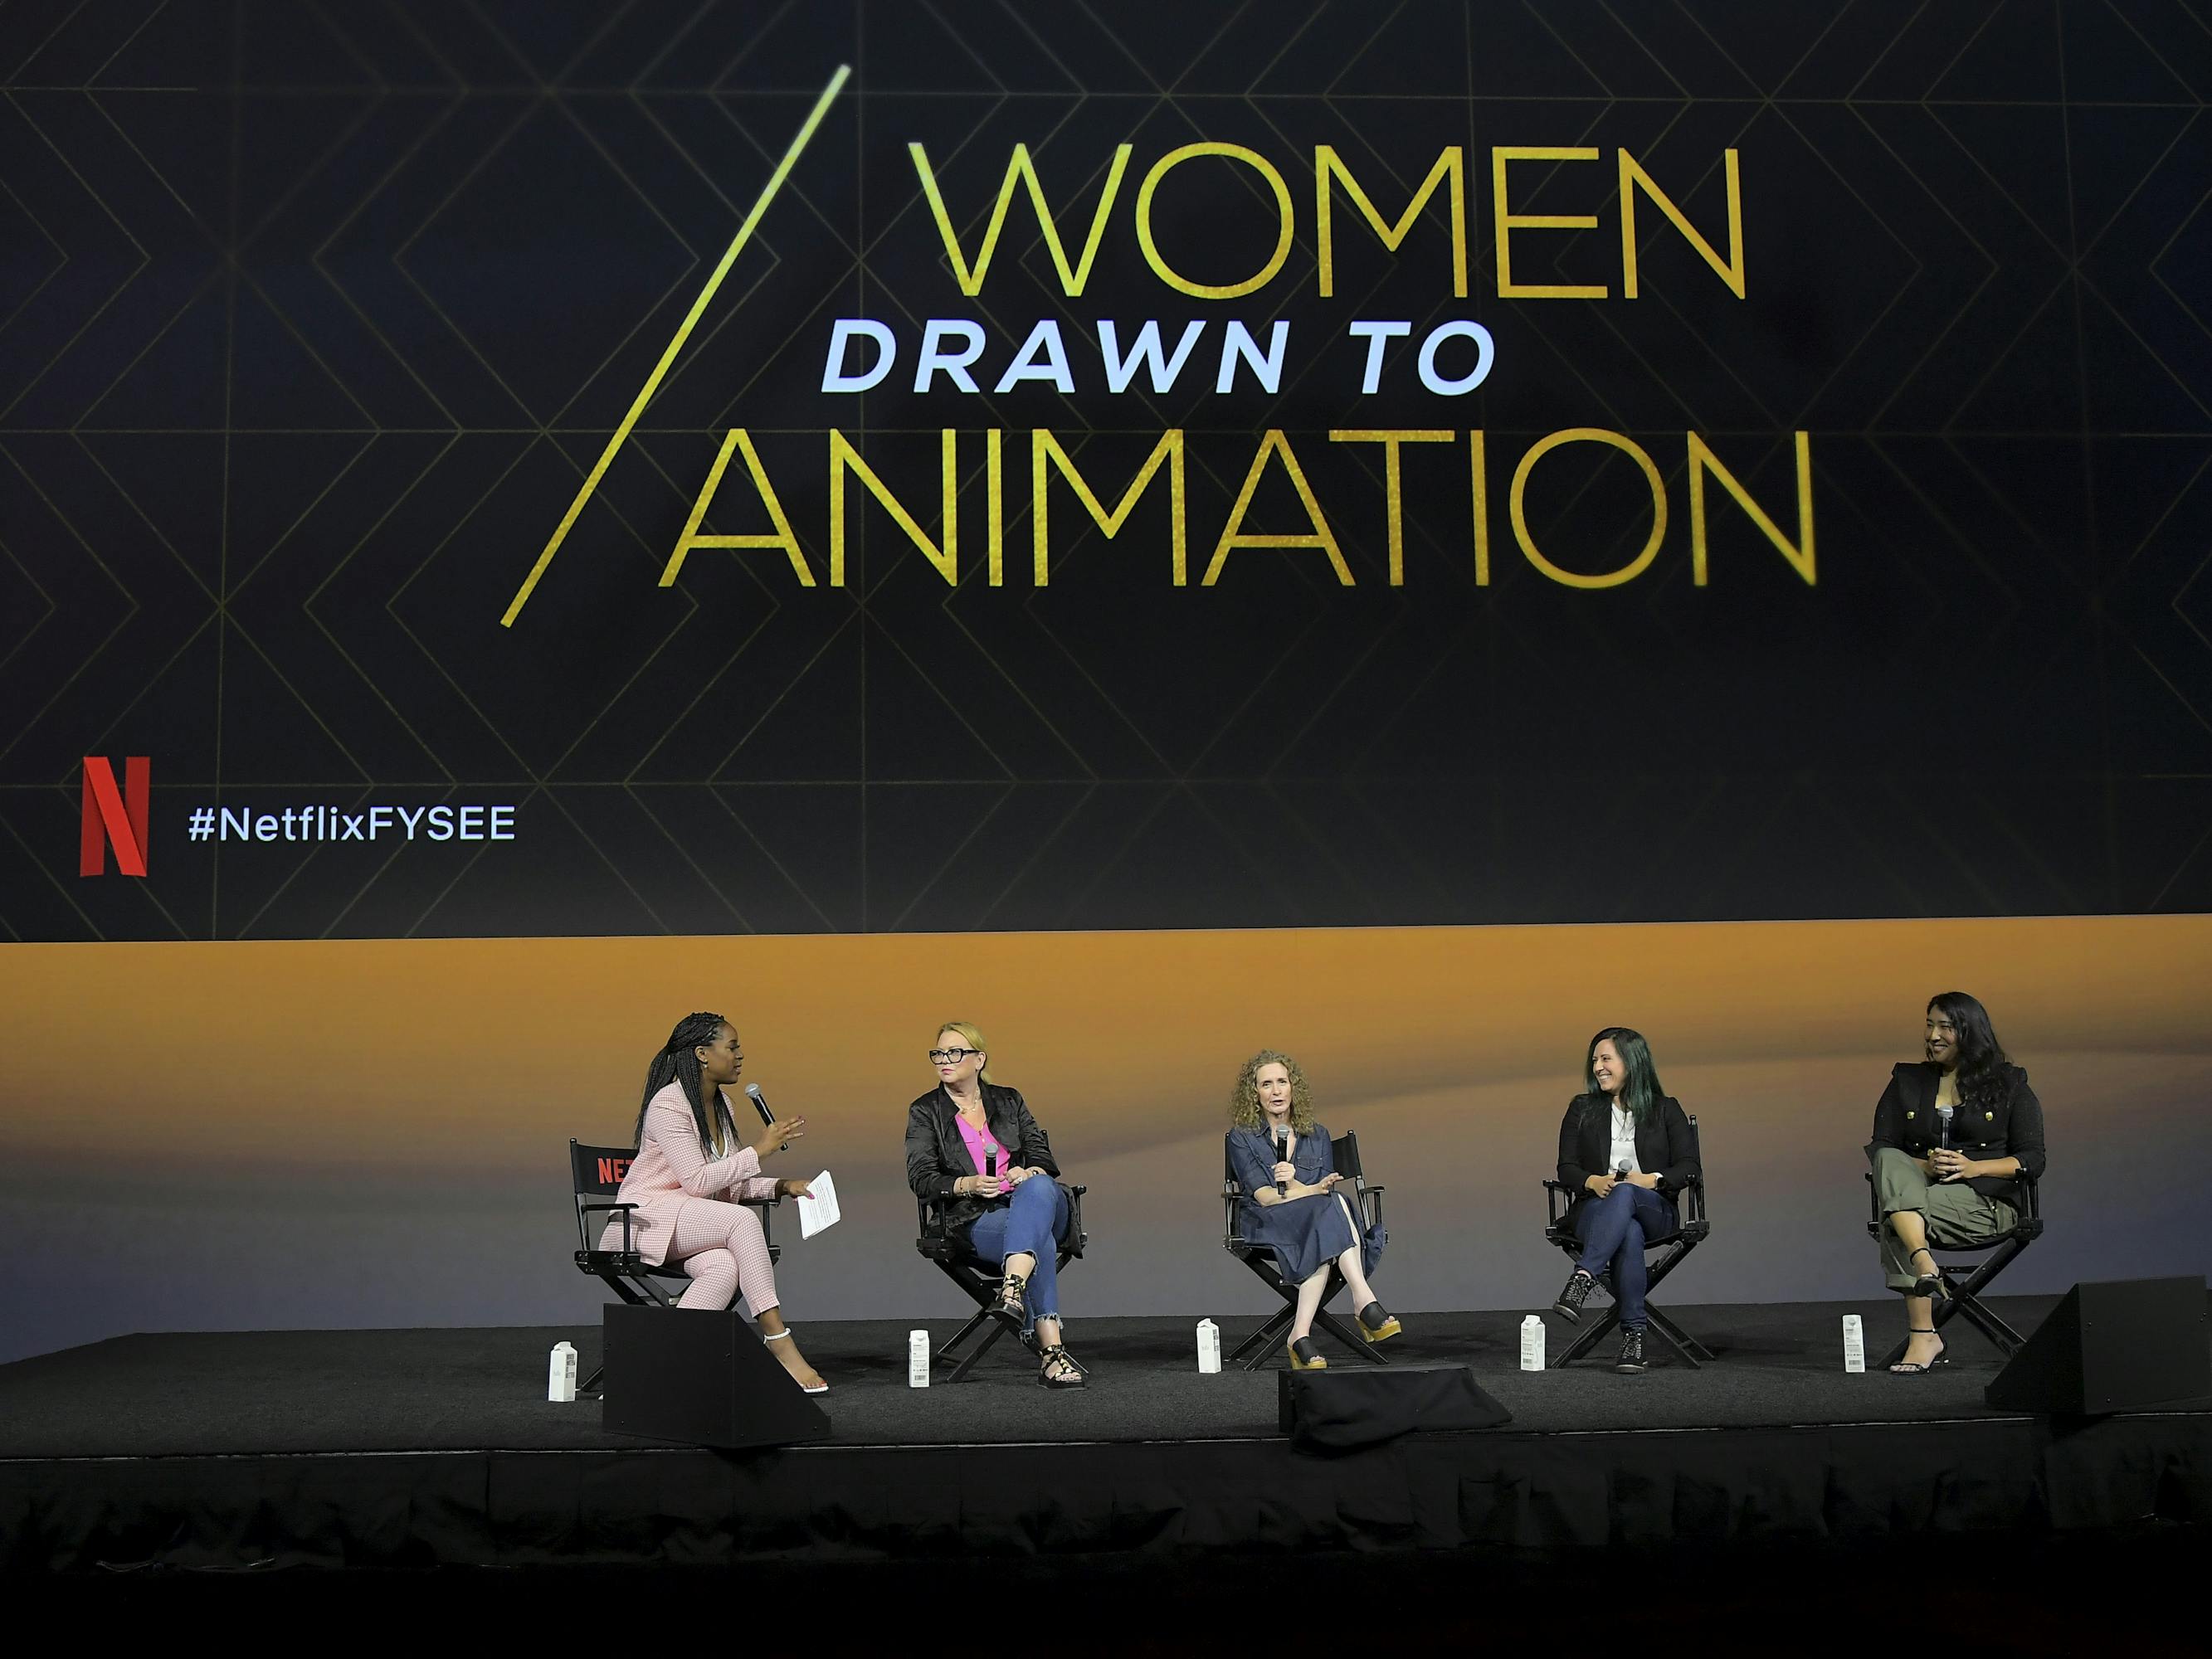 Janine Rubenstein, Melinda Dilger (Arcane), Jennifer Flackett (Big Mouth and Human Resources), Kelly Galuska (Human Resources), and Emily Dean (Love, Death + Robots) sit onstage against a screen that reads "Women Drawn to Animation."